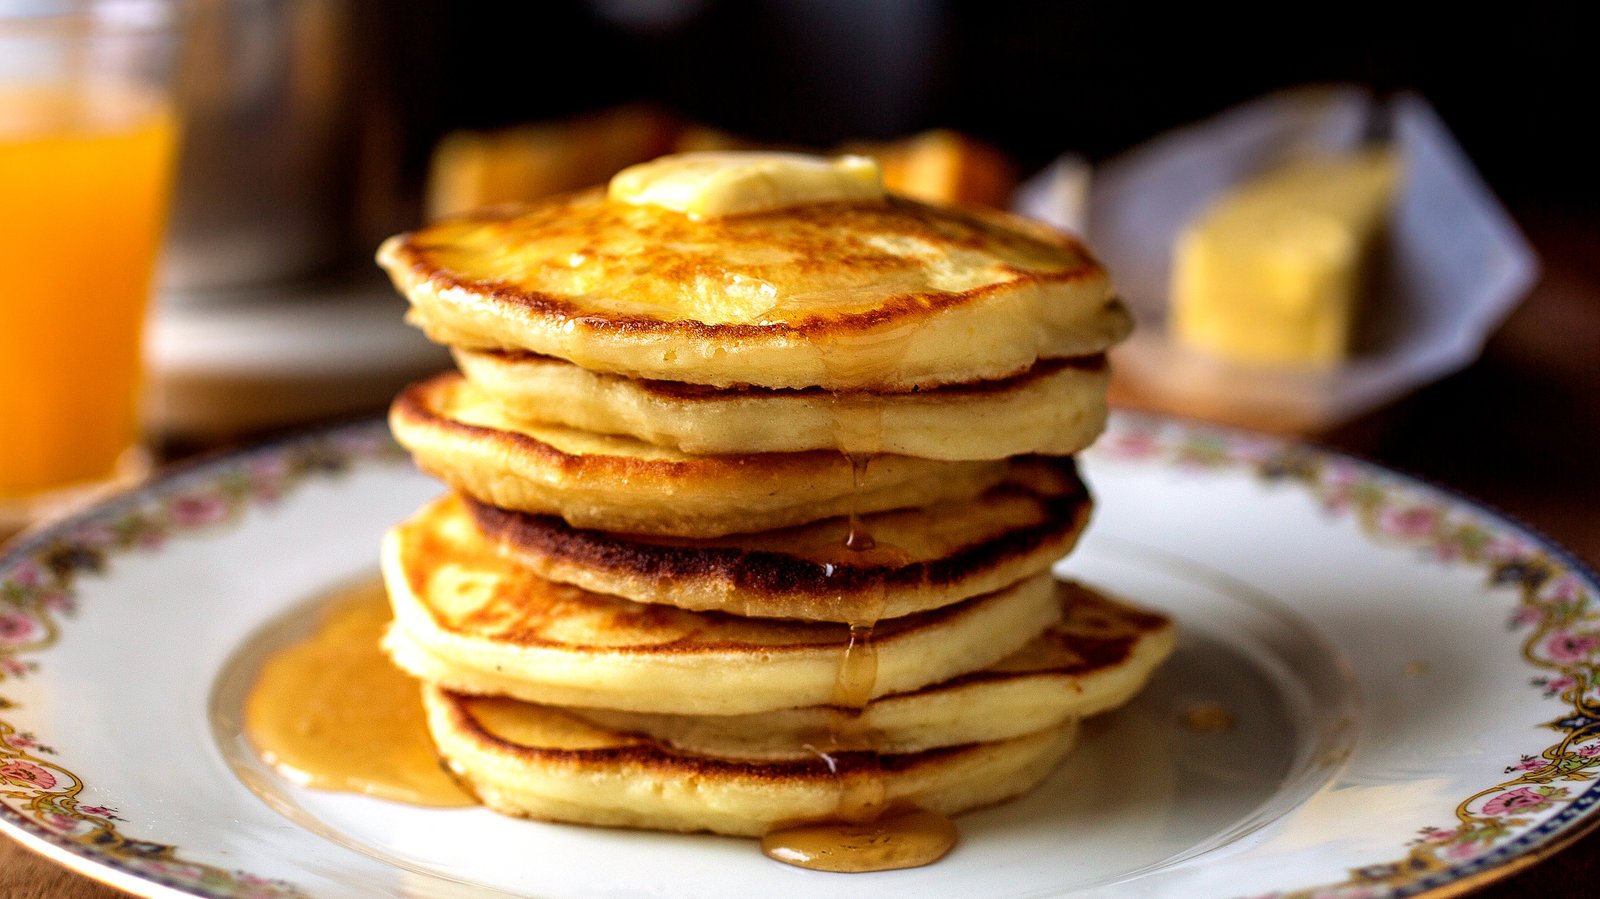 Eat at This 20-Course Buffet and We’ll Reveal What People Like About You pancakes